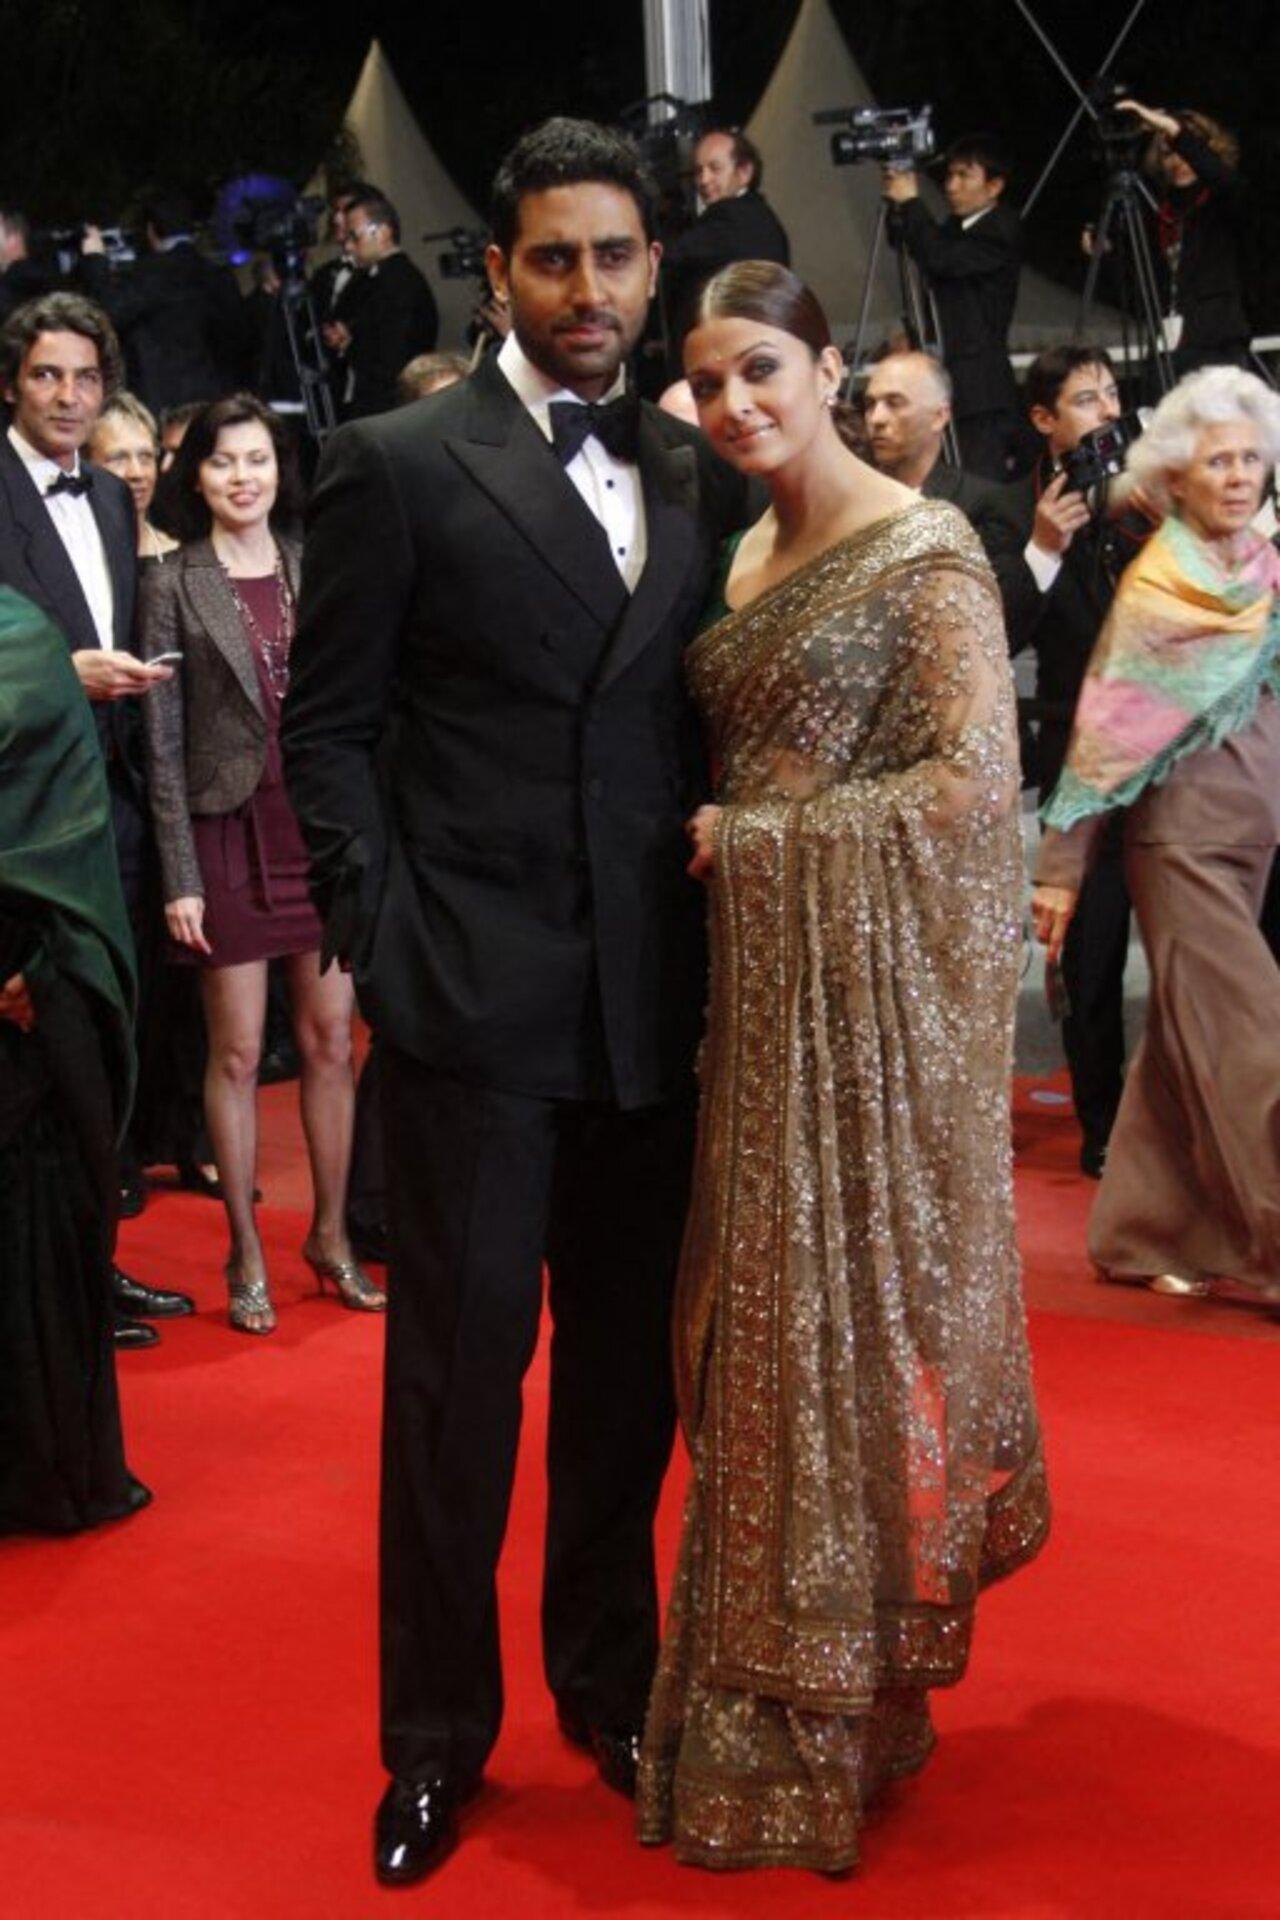 Aishwarya went for an ethnic ensemble and donned a sheer saree as she arrived with Abhishek for the screening of ‘Outrage’ at the 63rd Cannes Film Festival in 2010. 